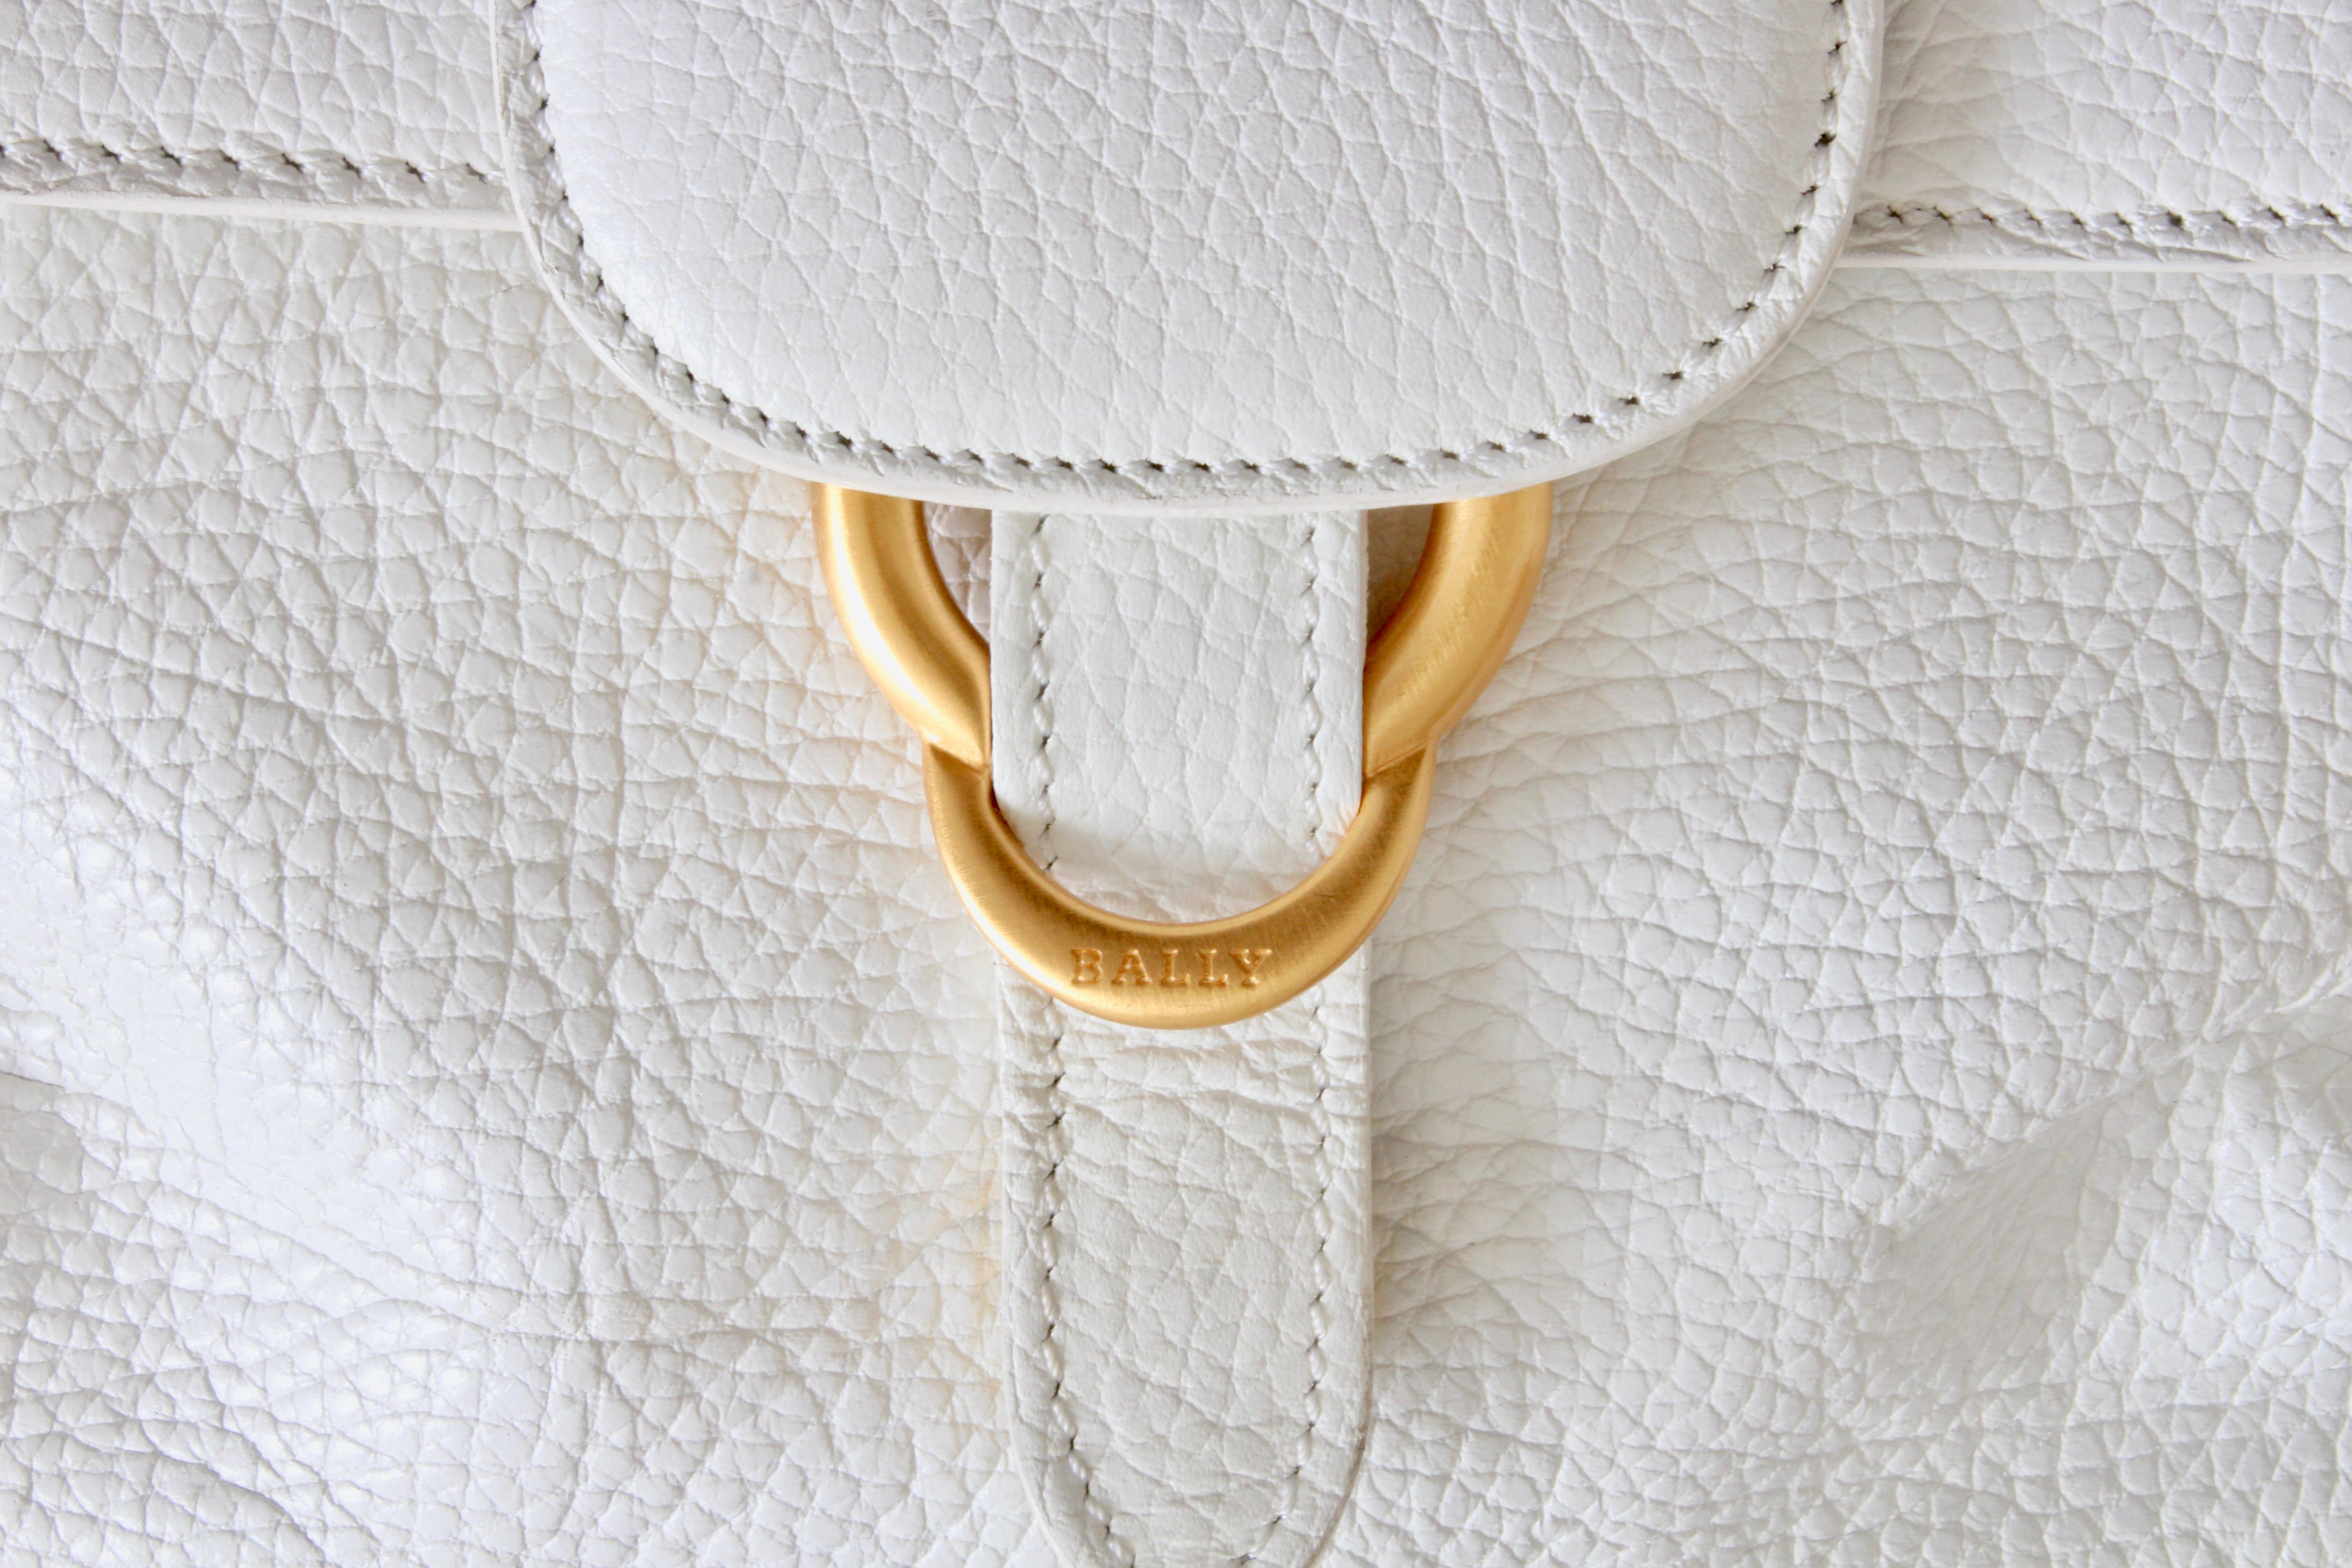 Bally Crossbody Bag White Pebbled Leather Top Flap Shoulder Bag Italy In Good Condition In Port Saint Lucie, FL